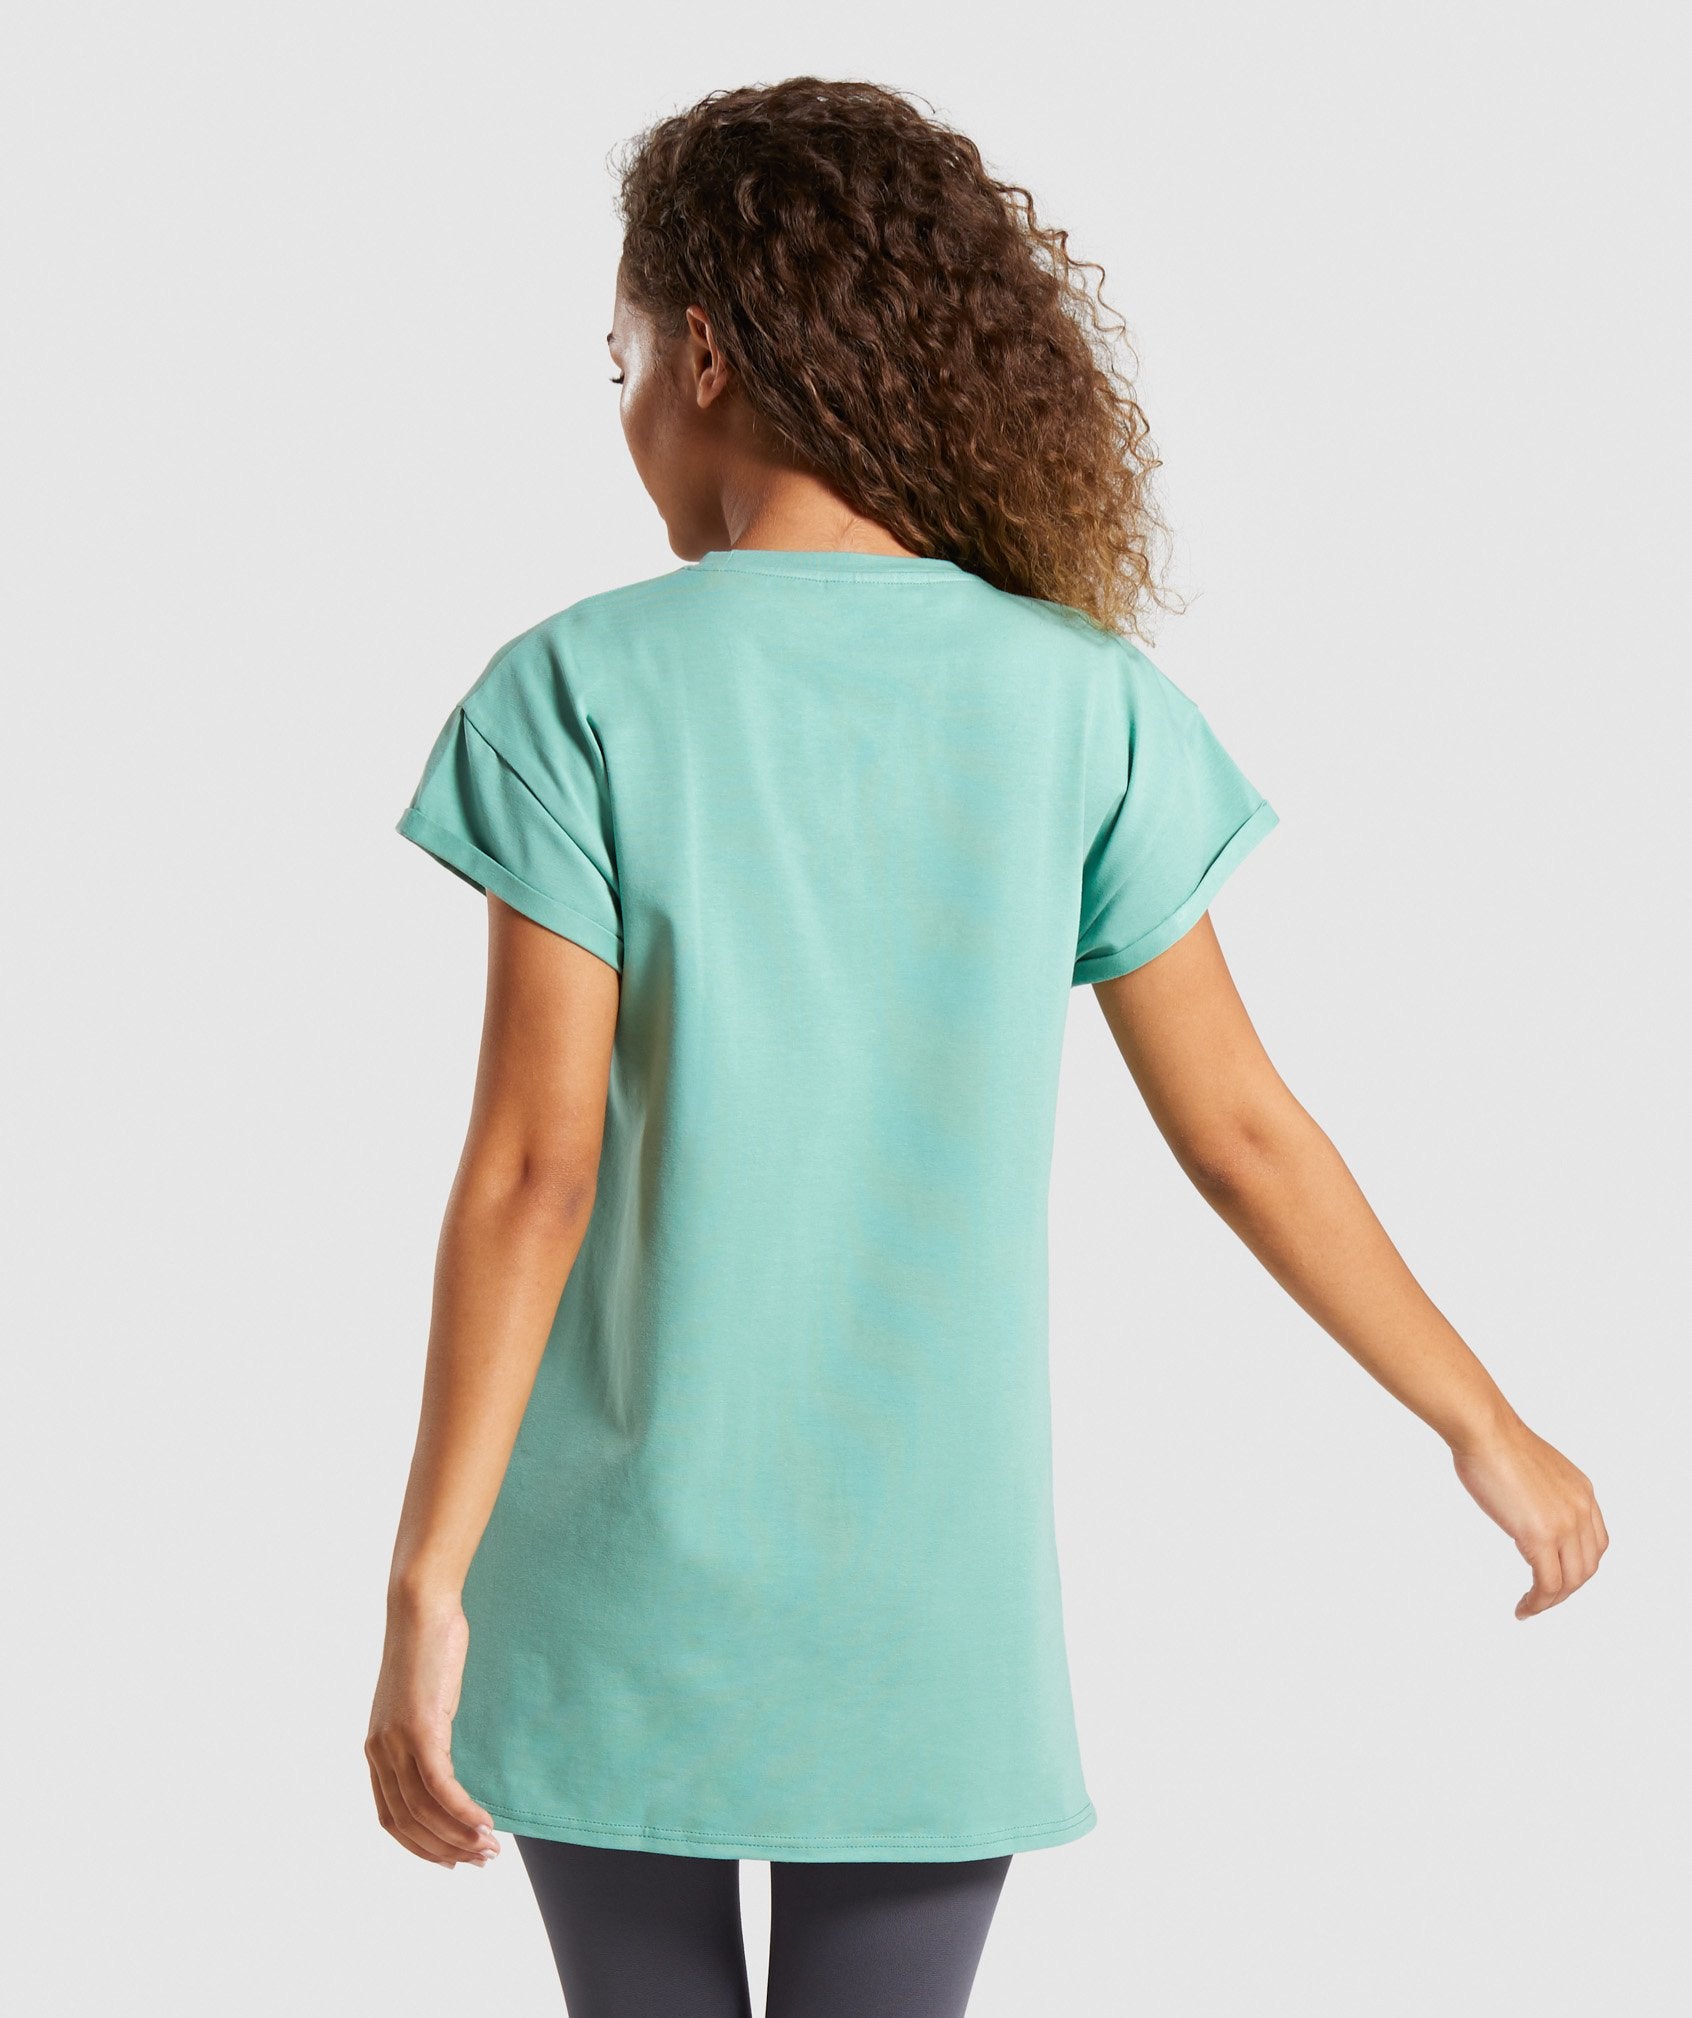 Roots Longline Tee in Green - view 2